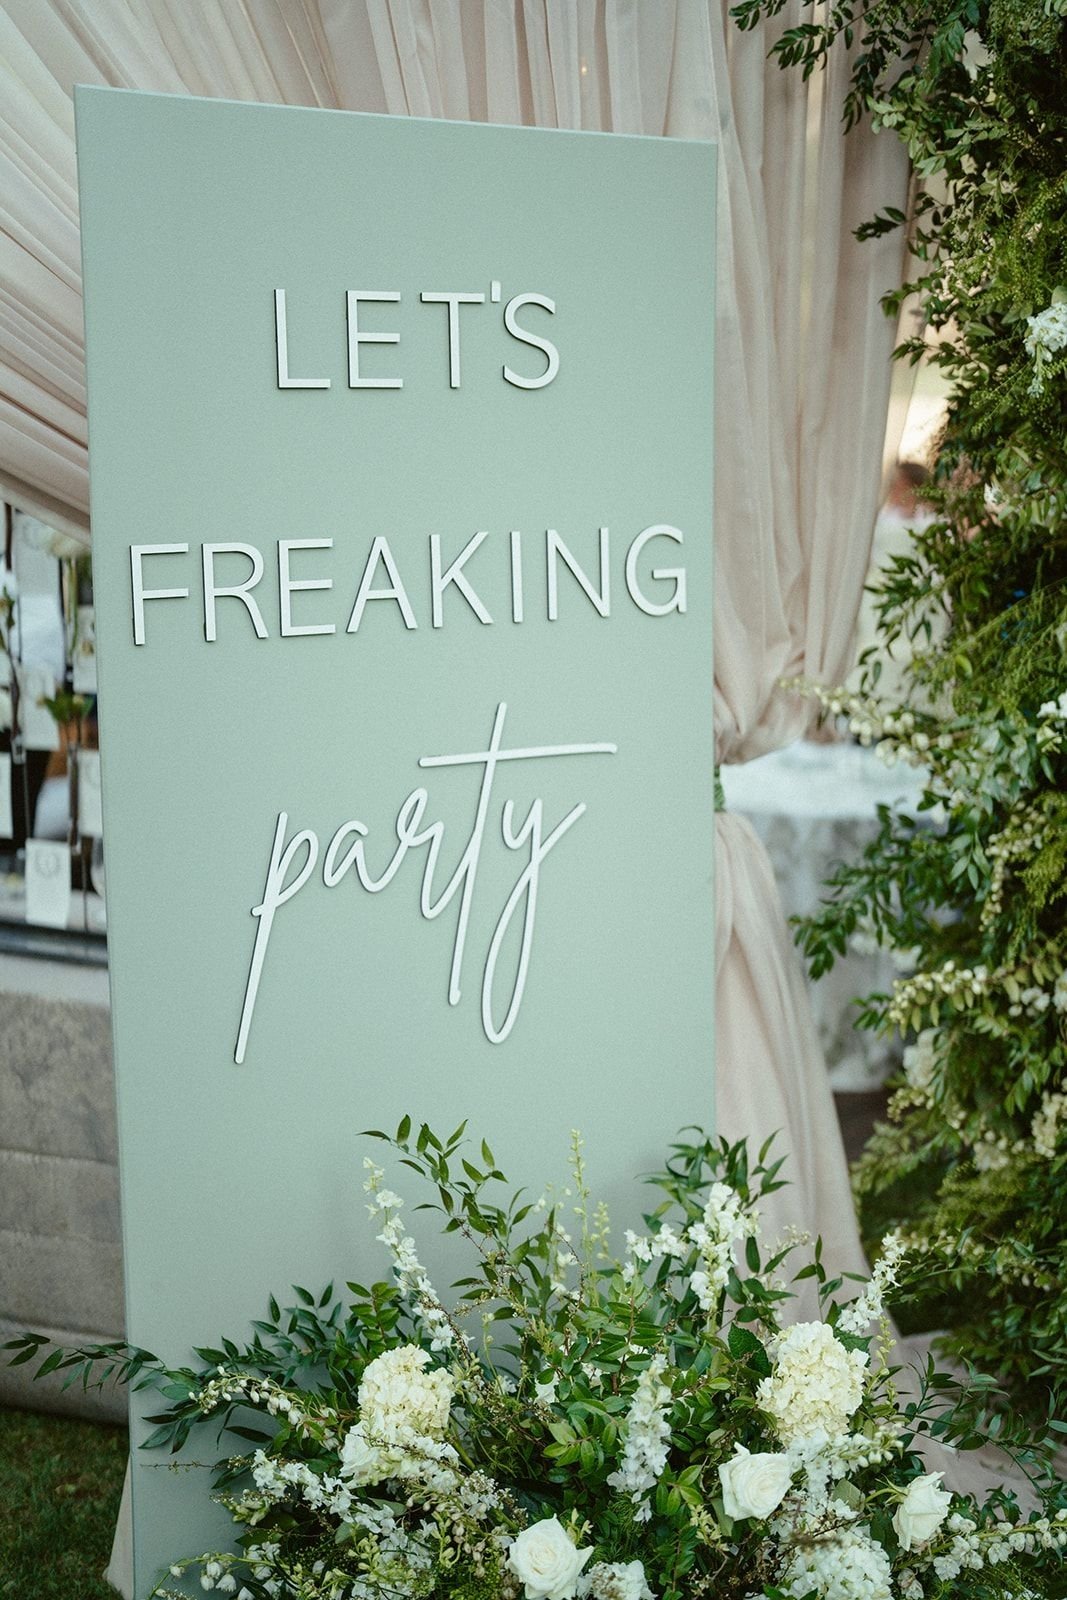 This sign says it all as we celebrate this wedding&rsquo;s ONE year anniversary this weekend 🥂
.
.
.
#weddinganniversary #wedding #weddingreception #party #greenwedding #weddingsignage #eventsignage #tententrance #tentdraping #champagnedraping #unsp